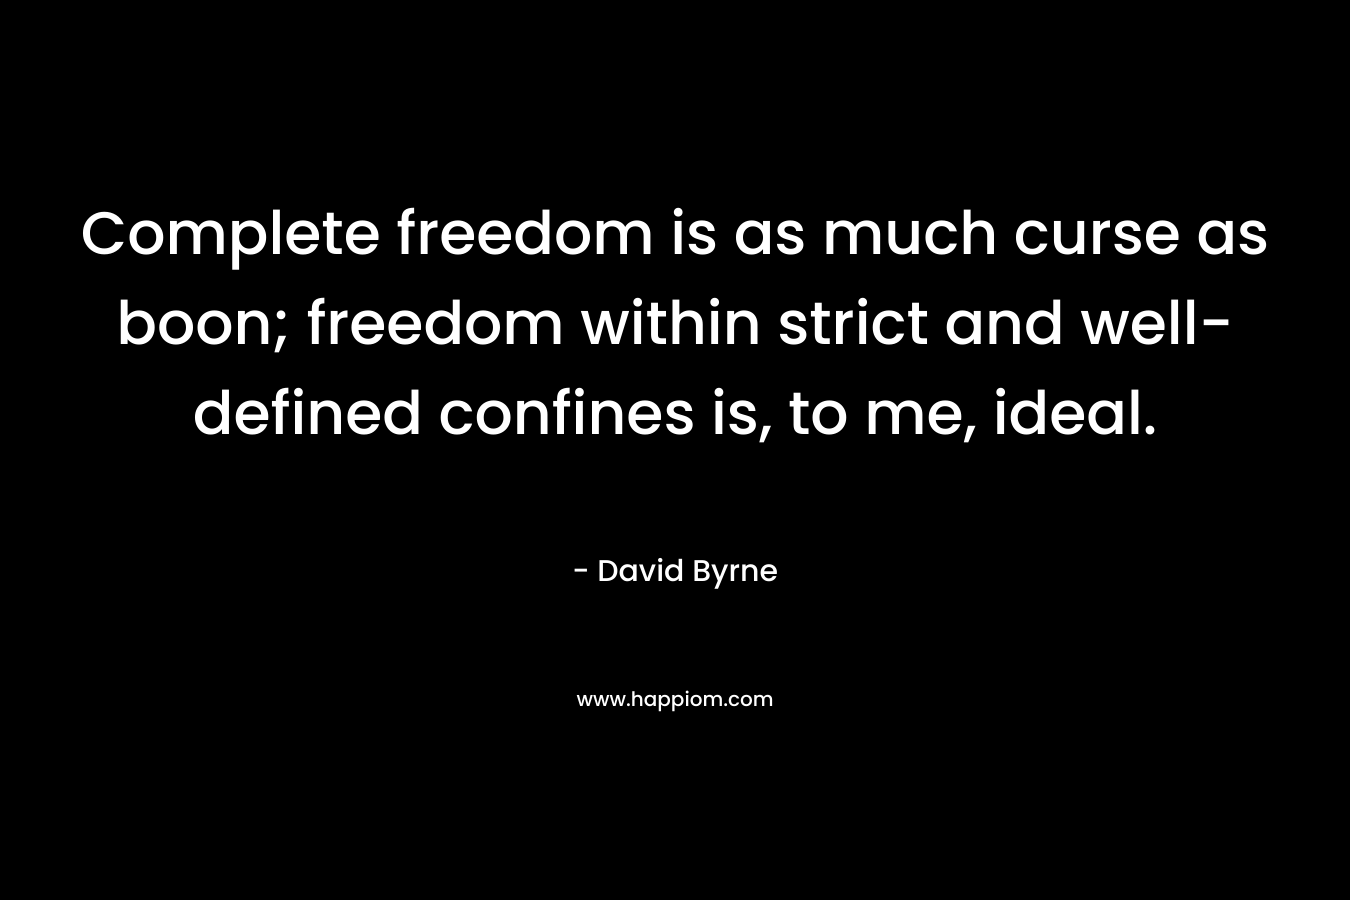 Complete freedom is as much curse as boon; freedom within strict and well-defined confines is, to me, ideal. – David Byrne